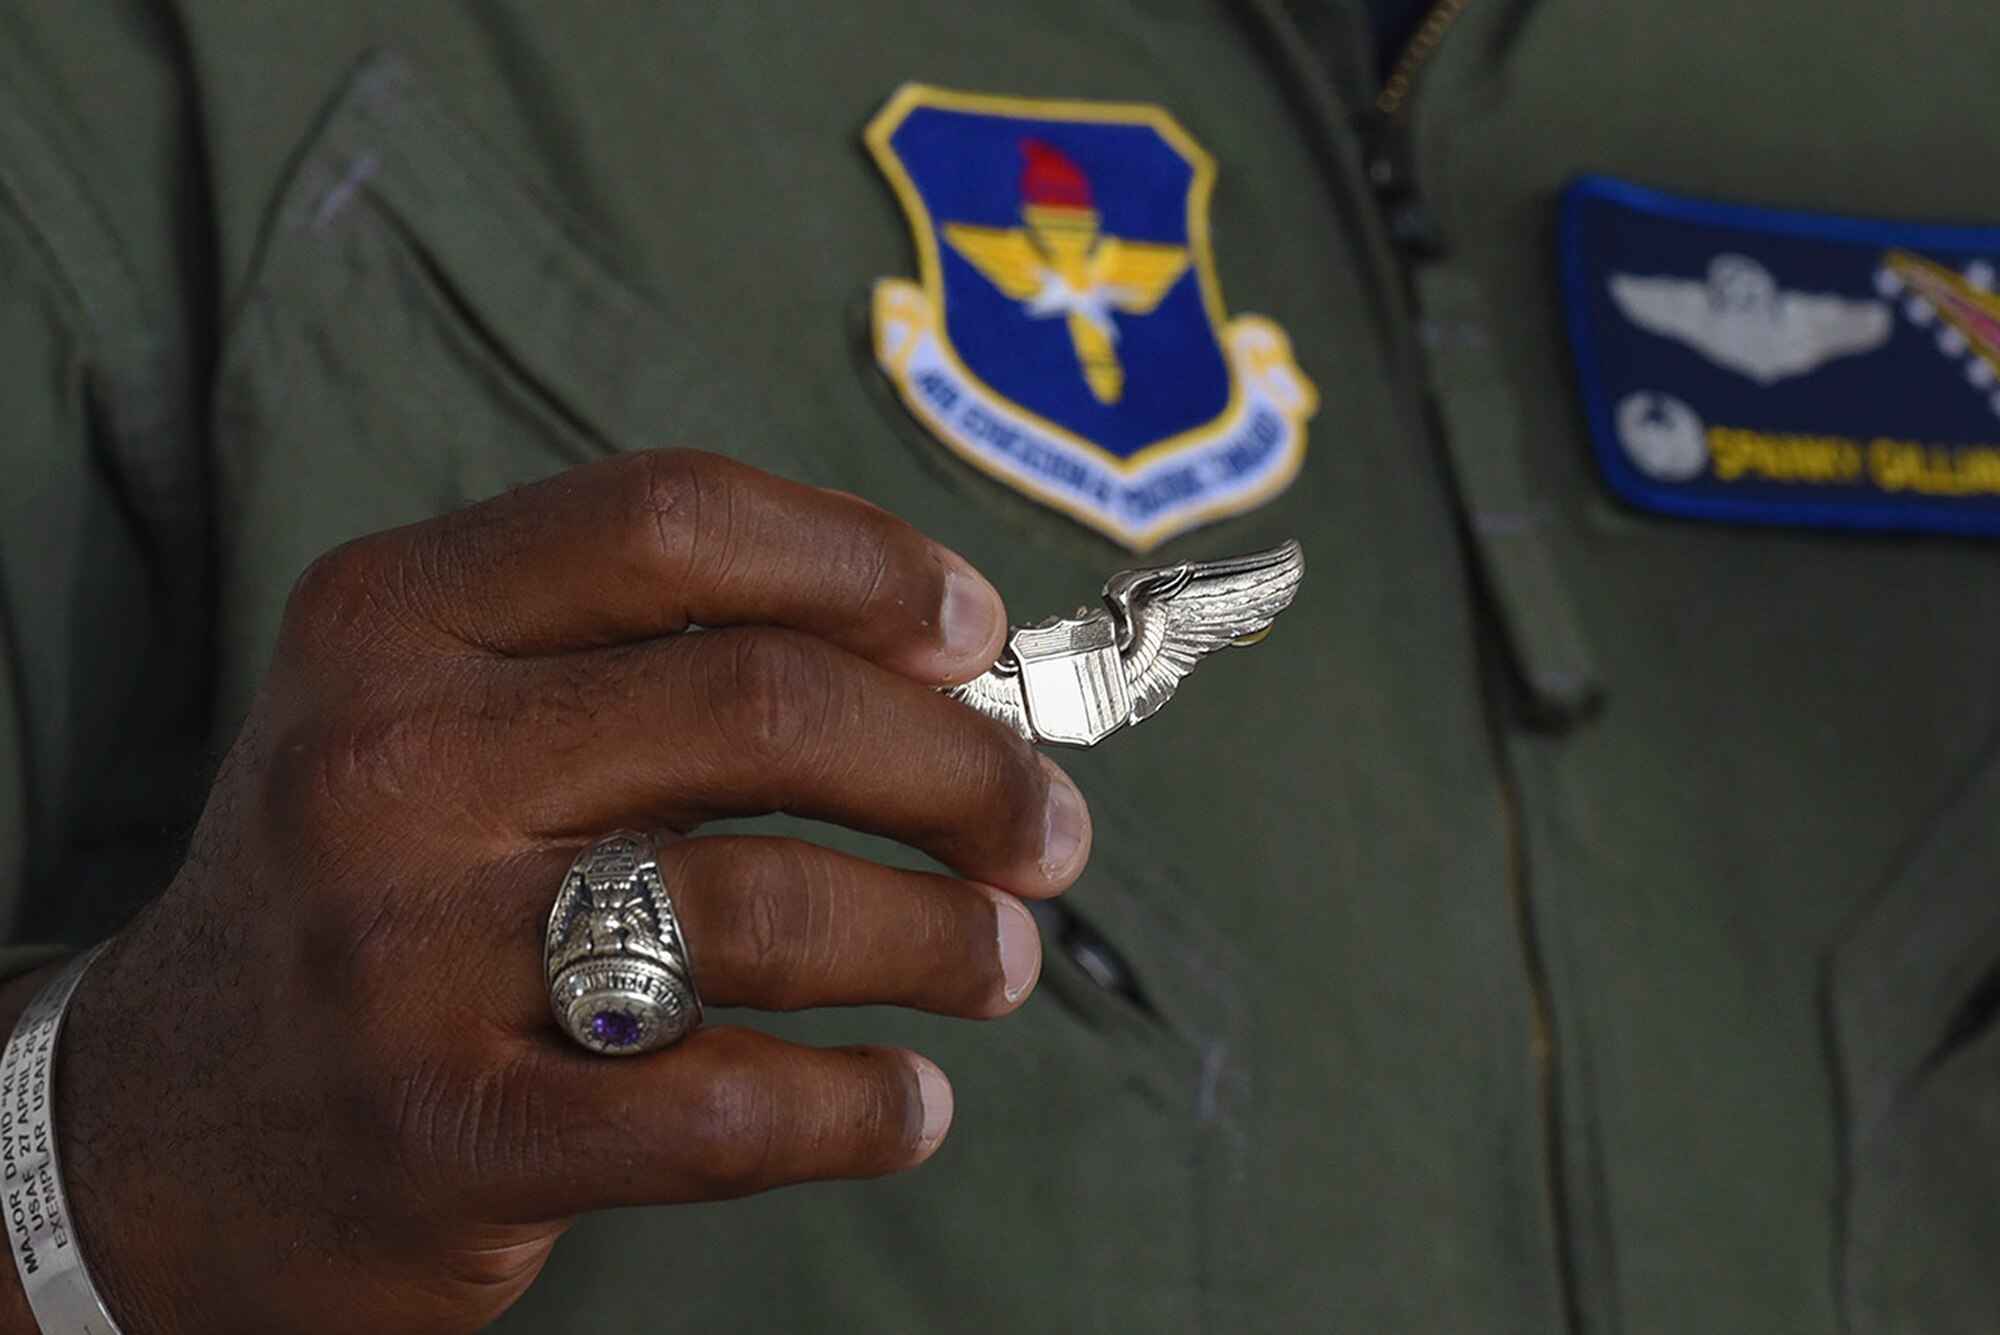 Lt. Col. Charles Gilliam, 48th Flying Training Squadron commander, Columbus Air Force Base, Miss., holds a Silver Wings badge to commemorate the Tuskegee Airmen and explains the significance of their World War II efforts, as a part of the Eyes Above the Horizon diversity outreach program, July 22, 2017, in Valdosta, Ga. The Valdosta Regional Airport welcomed approximately 100 10-19-year-olds as they took the Valdosta skies to commemorate the 76th Anniversary of the historic Tuskegee Airmen. The program focuses on mentoring and familiarizing underrepresented minorities with basic flying fundamentals. (U.S. Air Force photo by Senior Airman Greg Nash) 